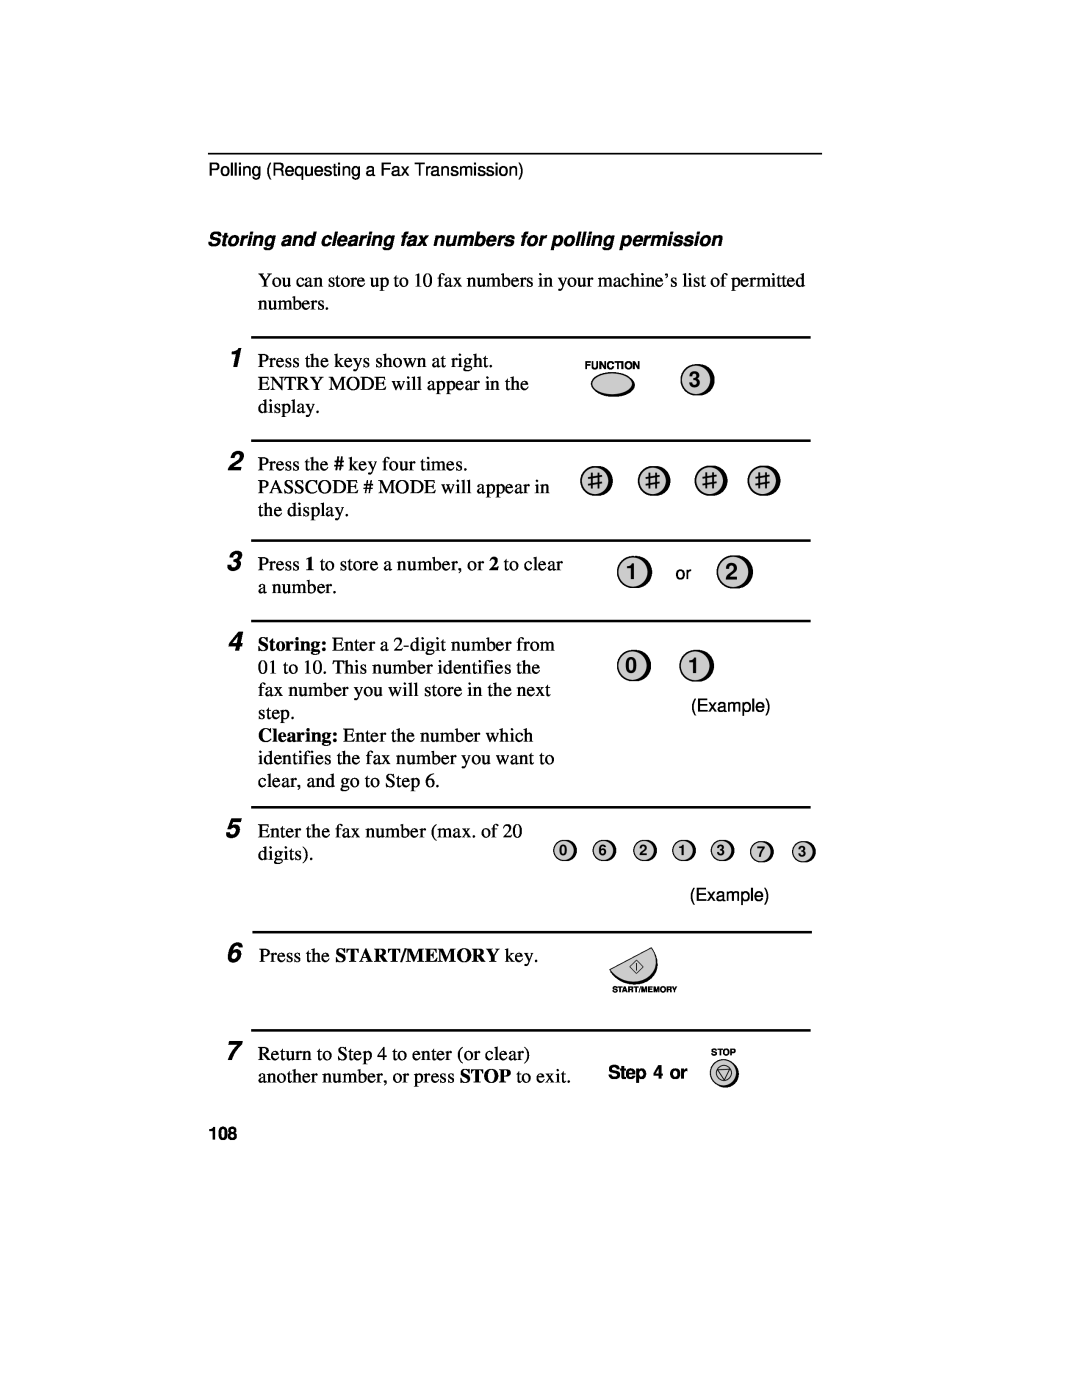 Sharp UX-460 operation manual Storing and clearing fax numbers for polling permission 